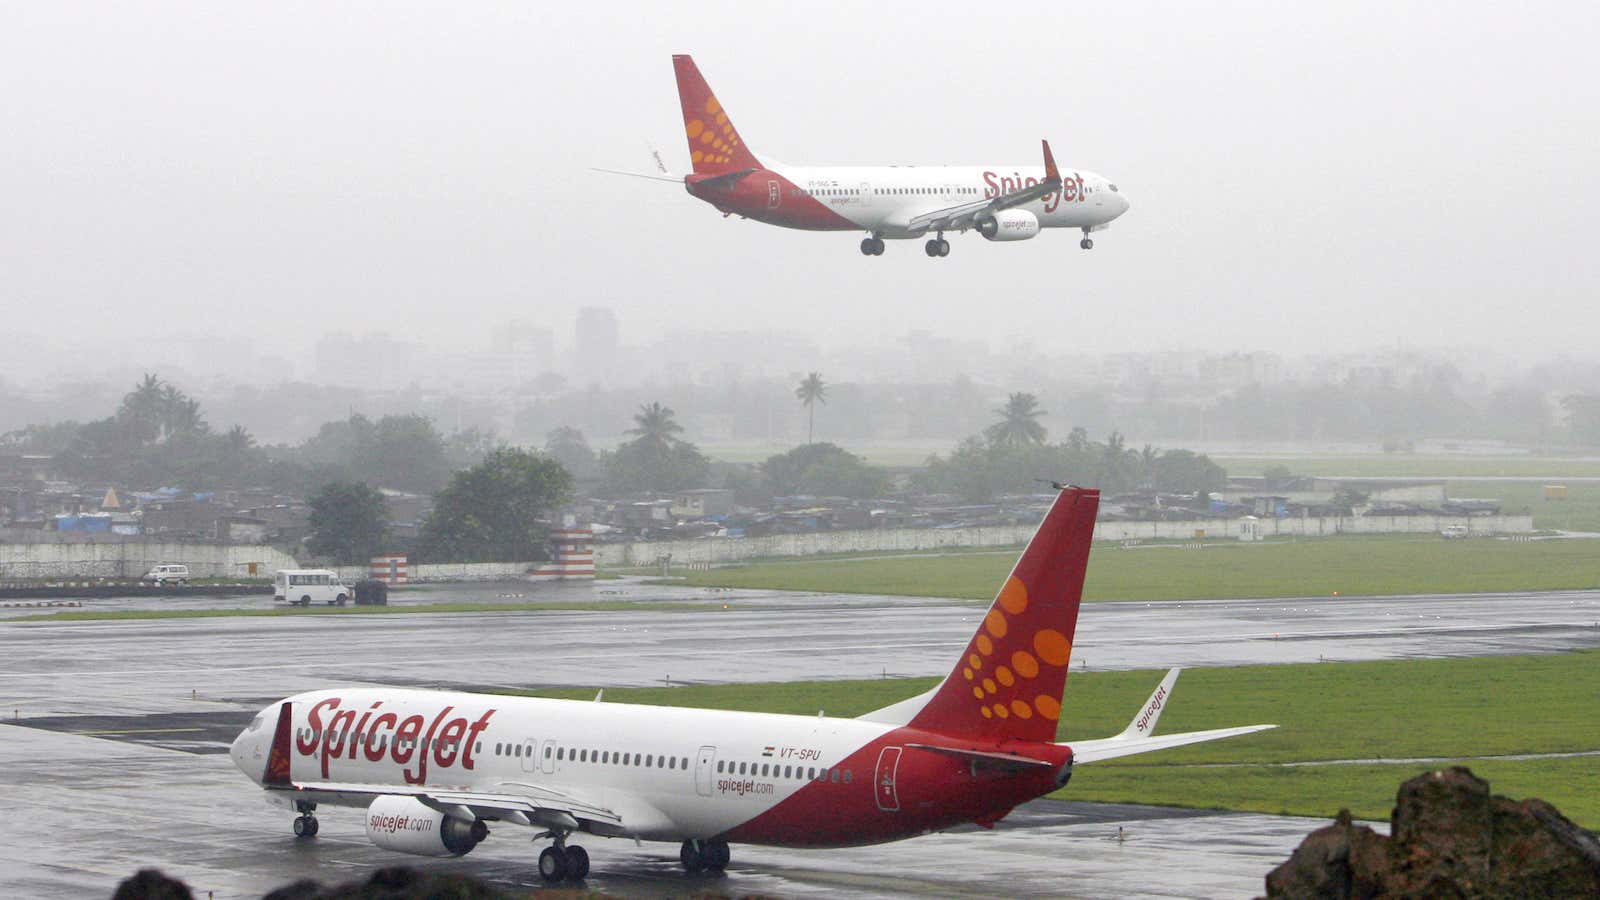 Looks like SpiceJet has survived the storm.